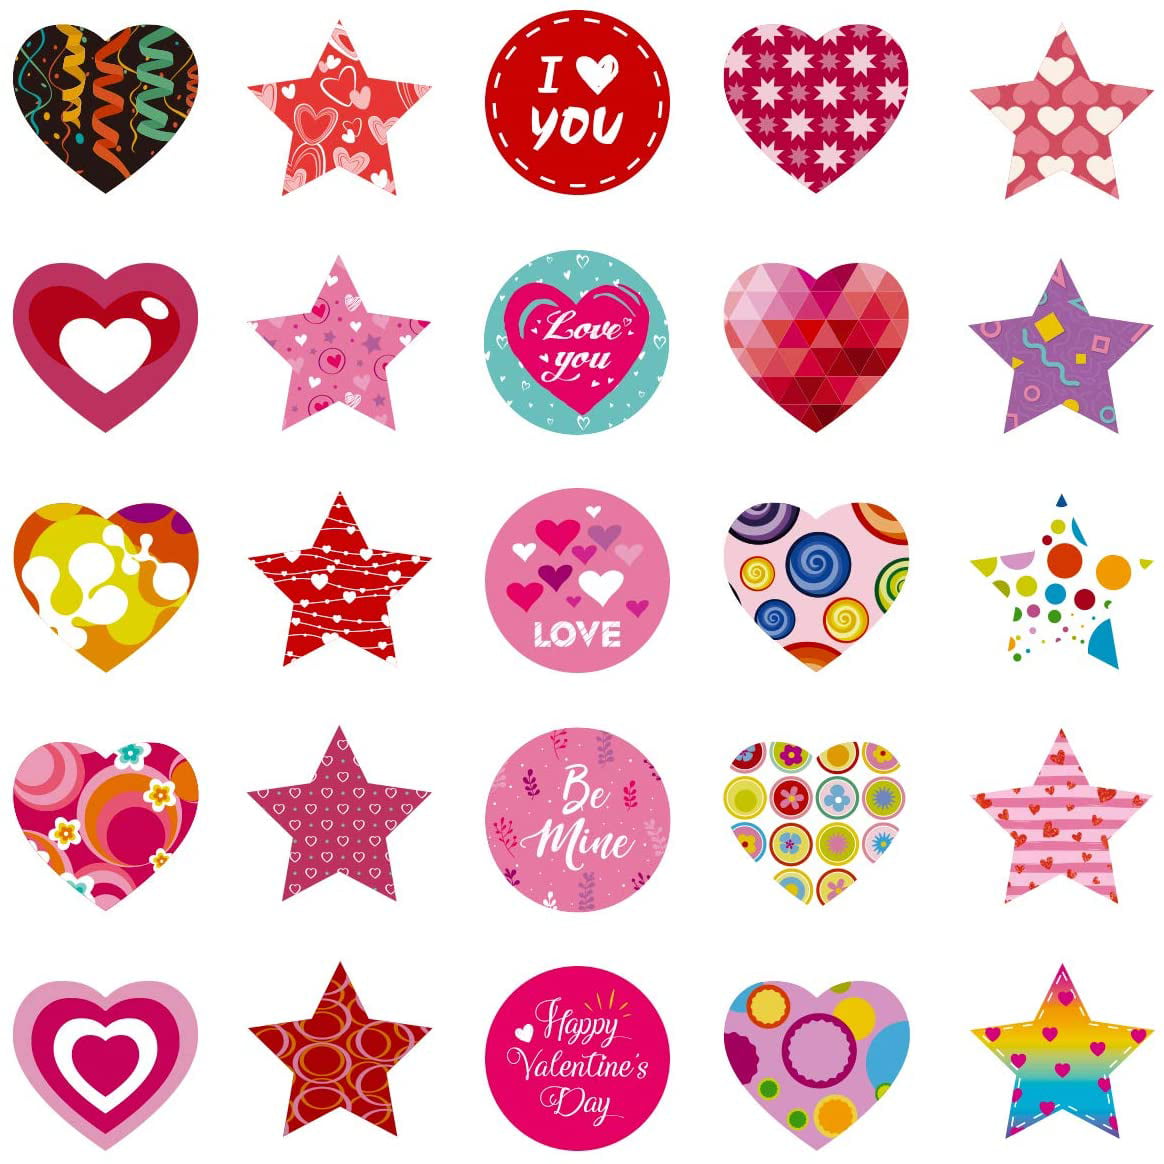 WaaHome 20 Sheets Valentines Heart Stickers Valentines Day Love Decorative Stickers for Kids Party Decorations Scrapbooking Supplies Class Reward 